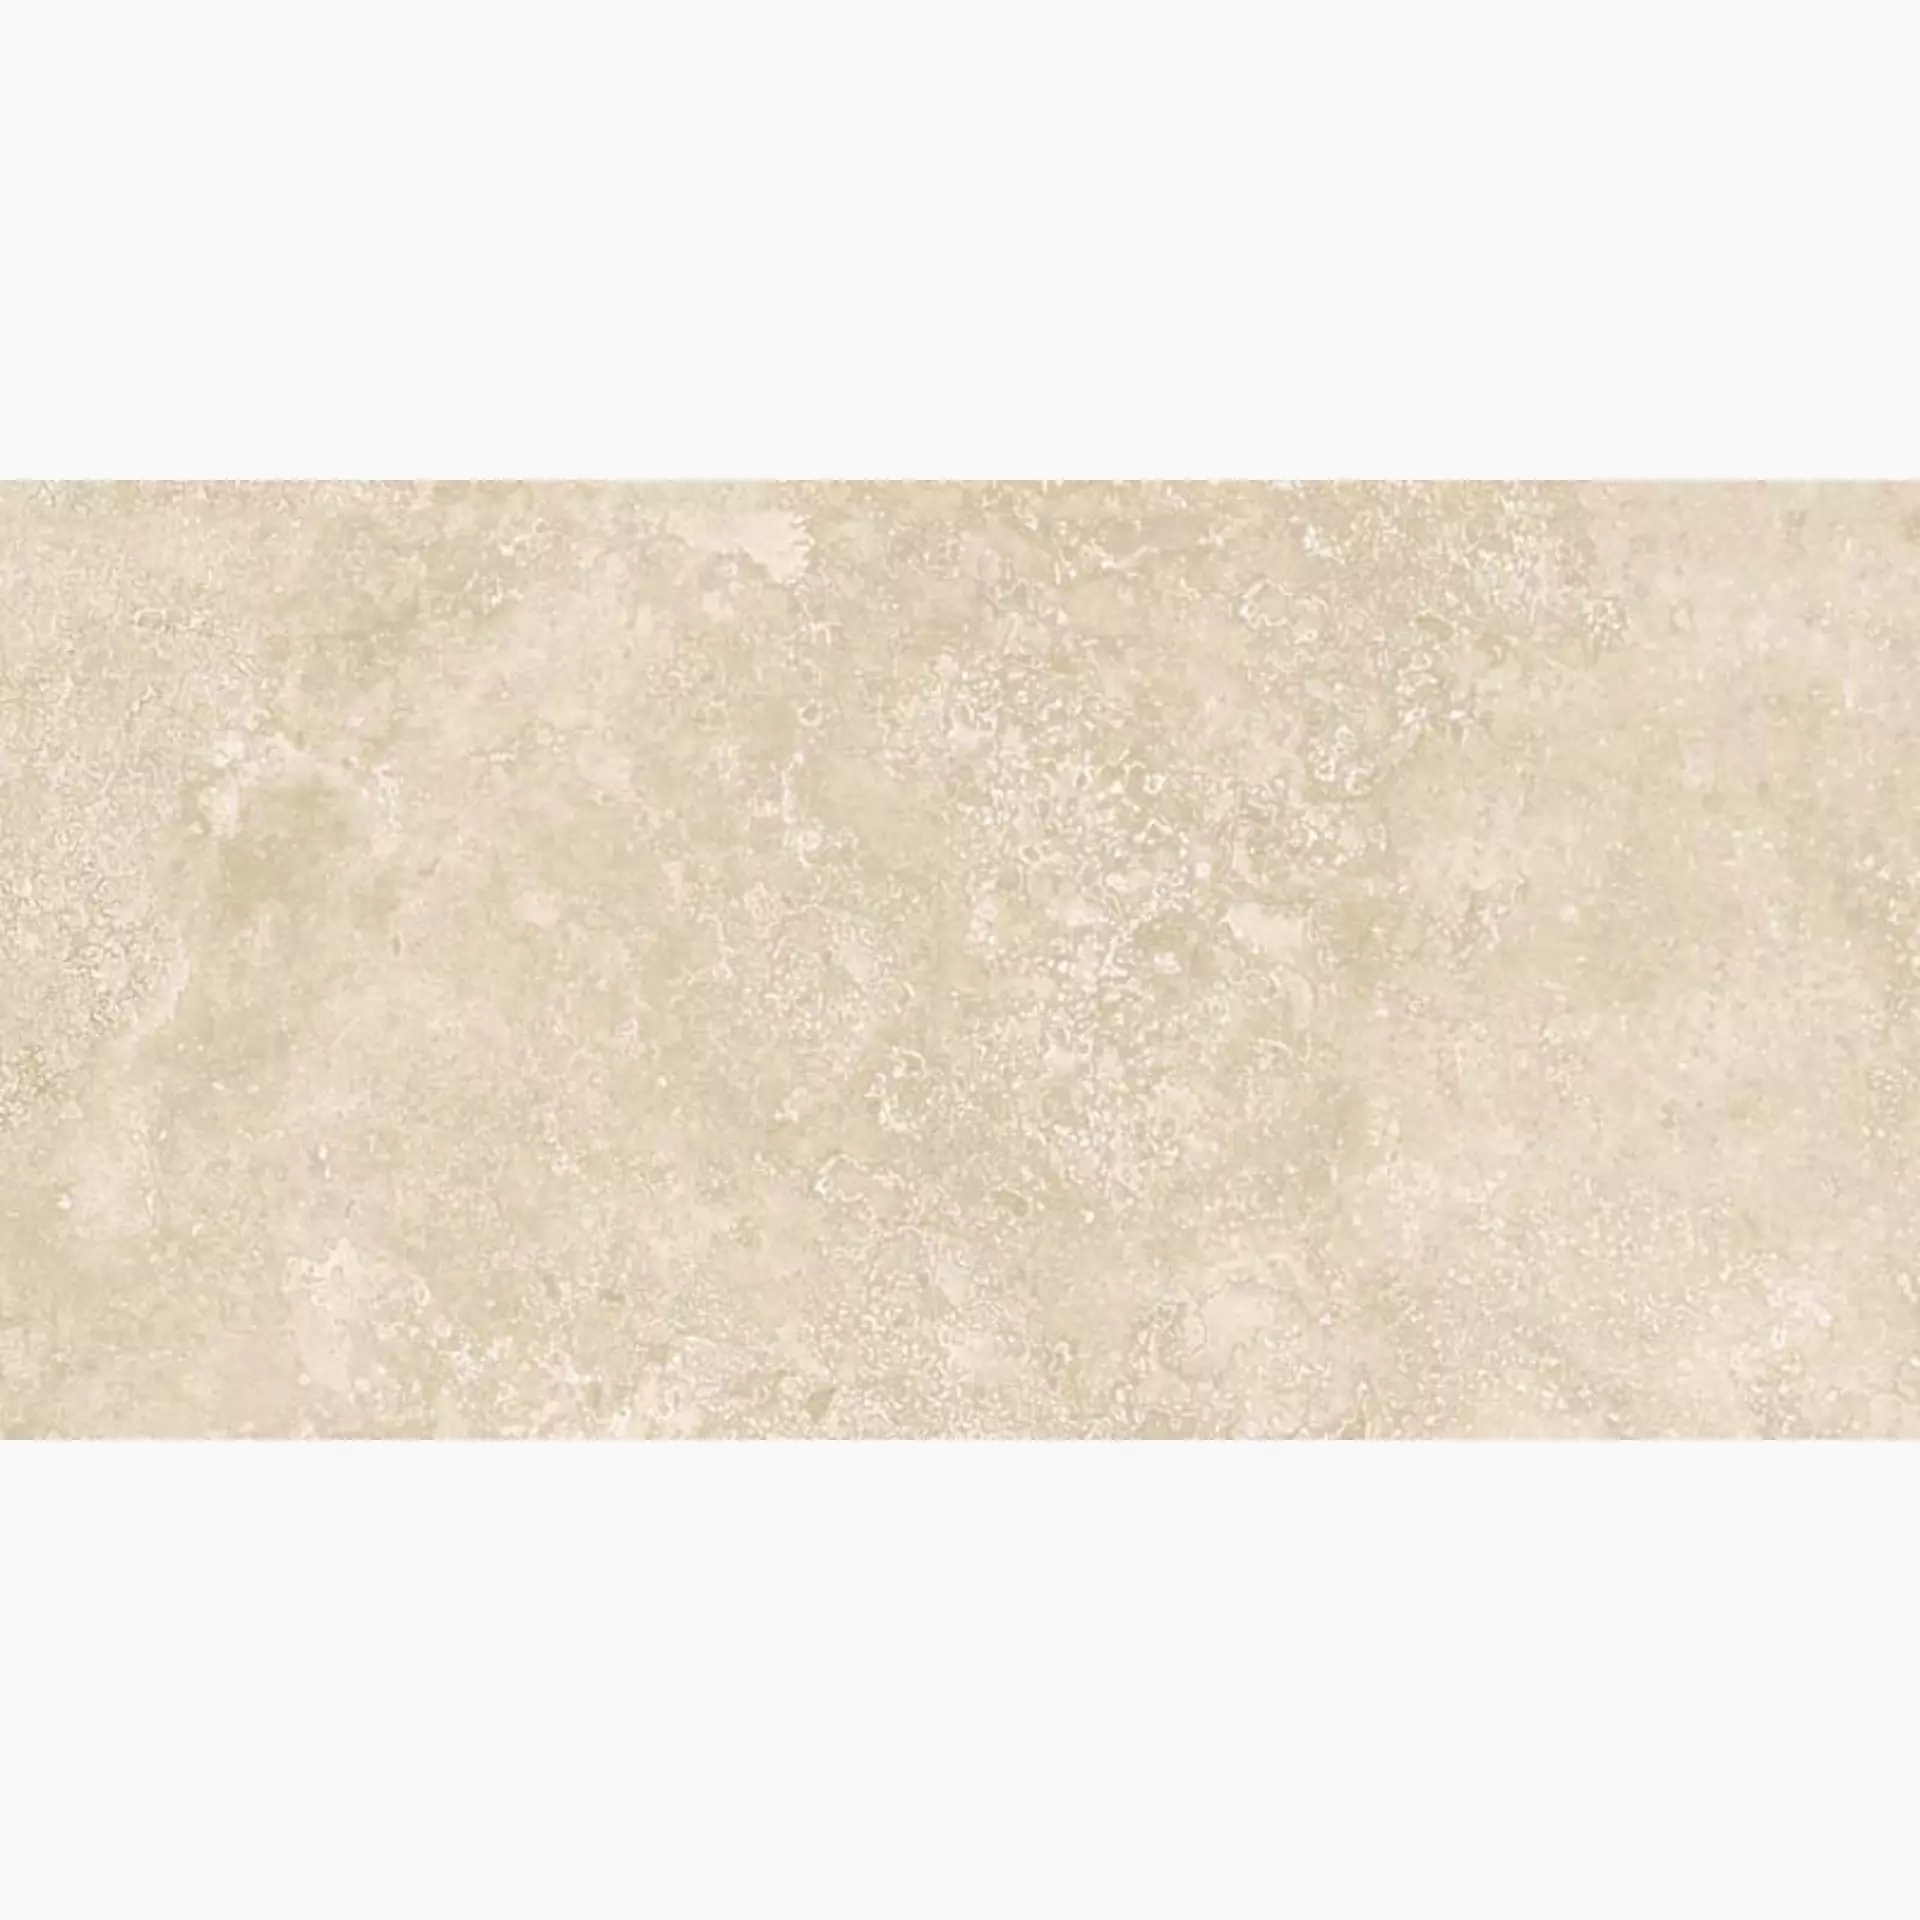 Sant Agostino Via Appia Beige Natural CSAACCBE30 30x60cm rectified 10mm